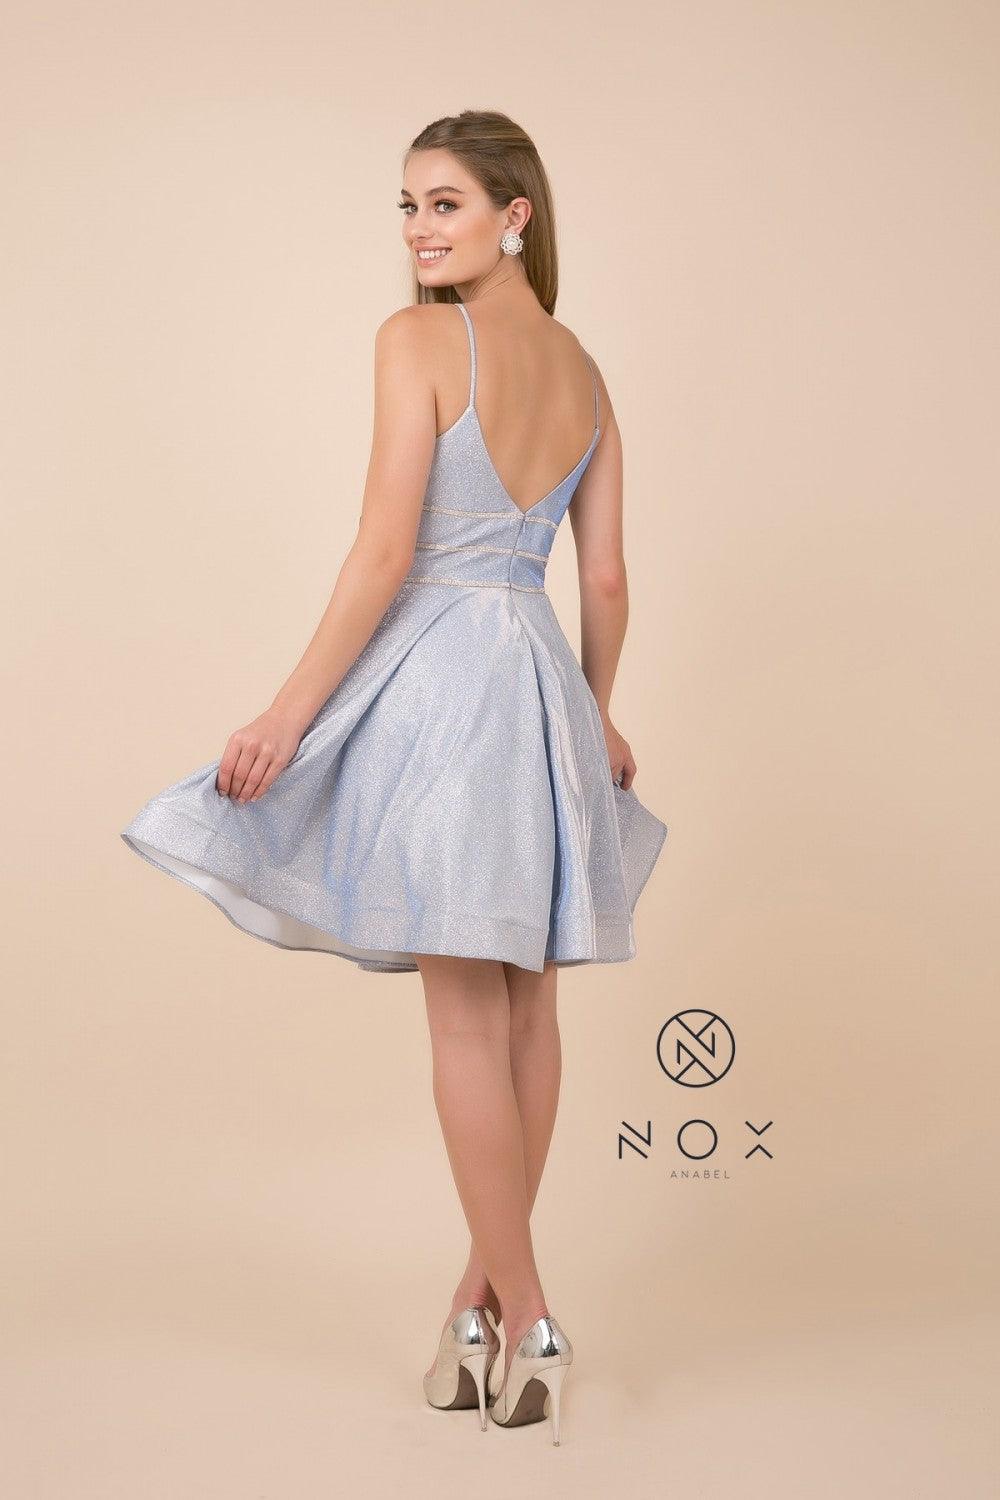 Prom Short Sleeveless Dress Homecoming - The Dress Outlet Nox Anabel